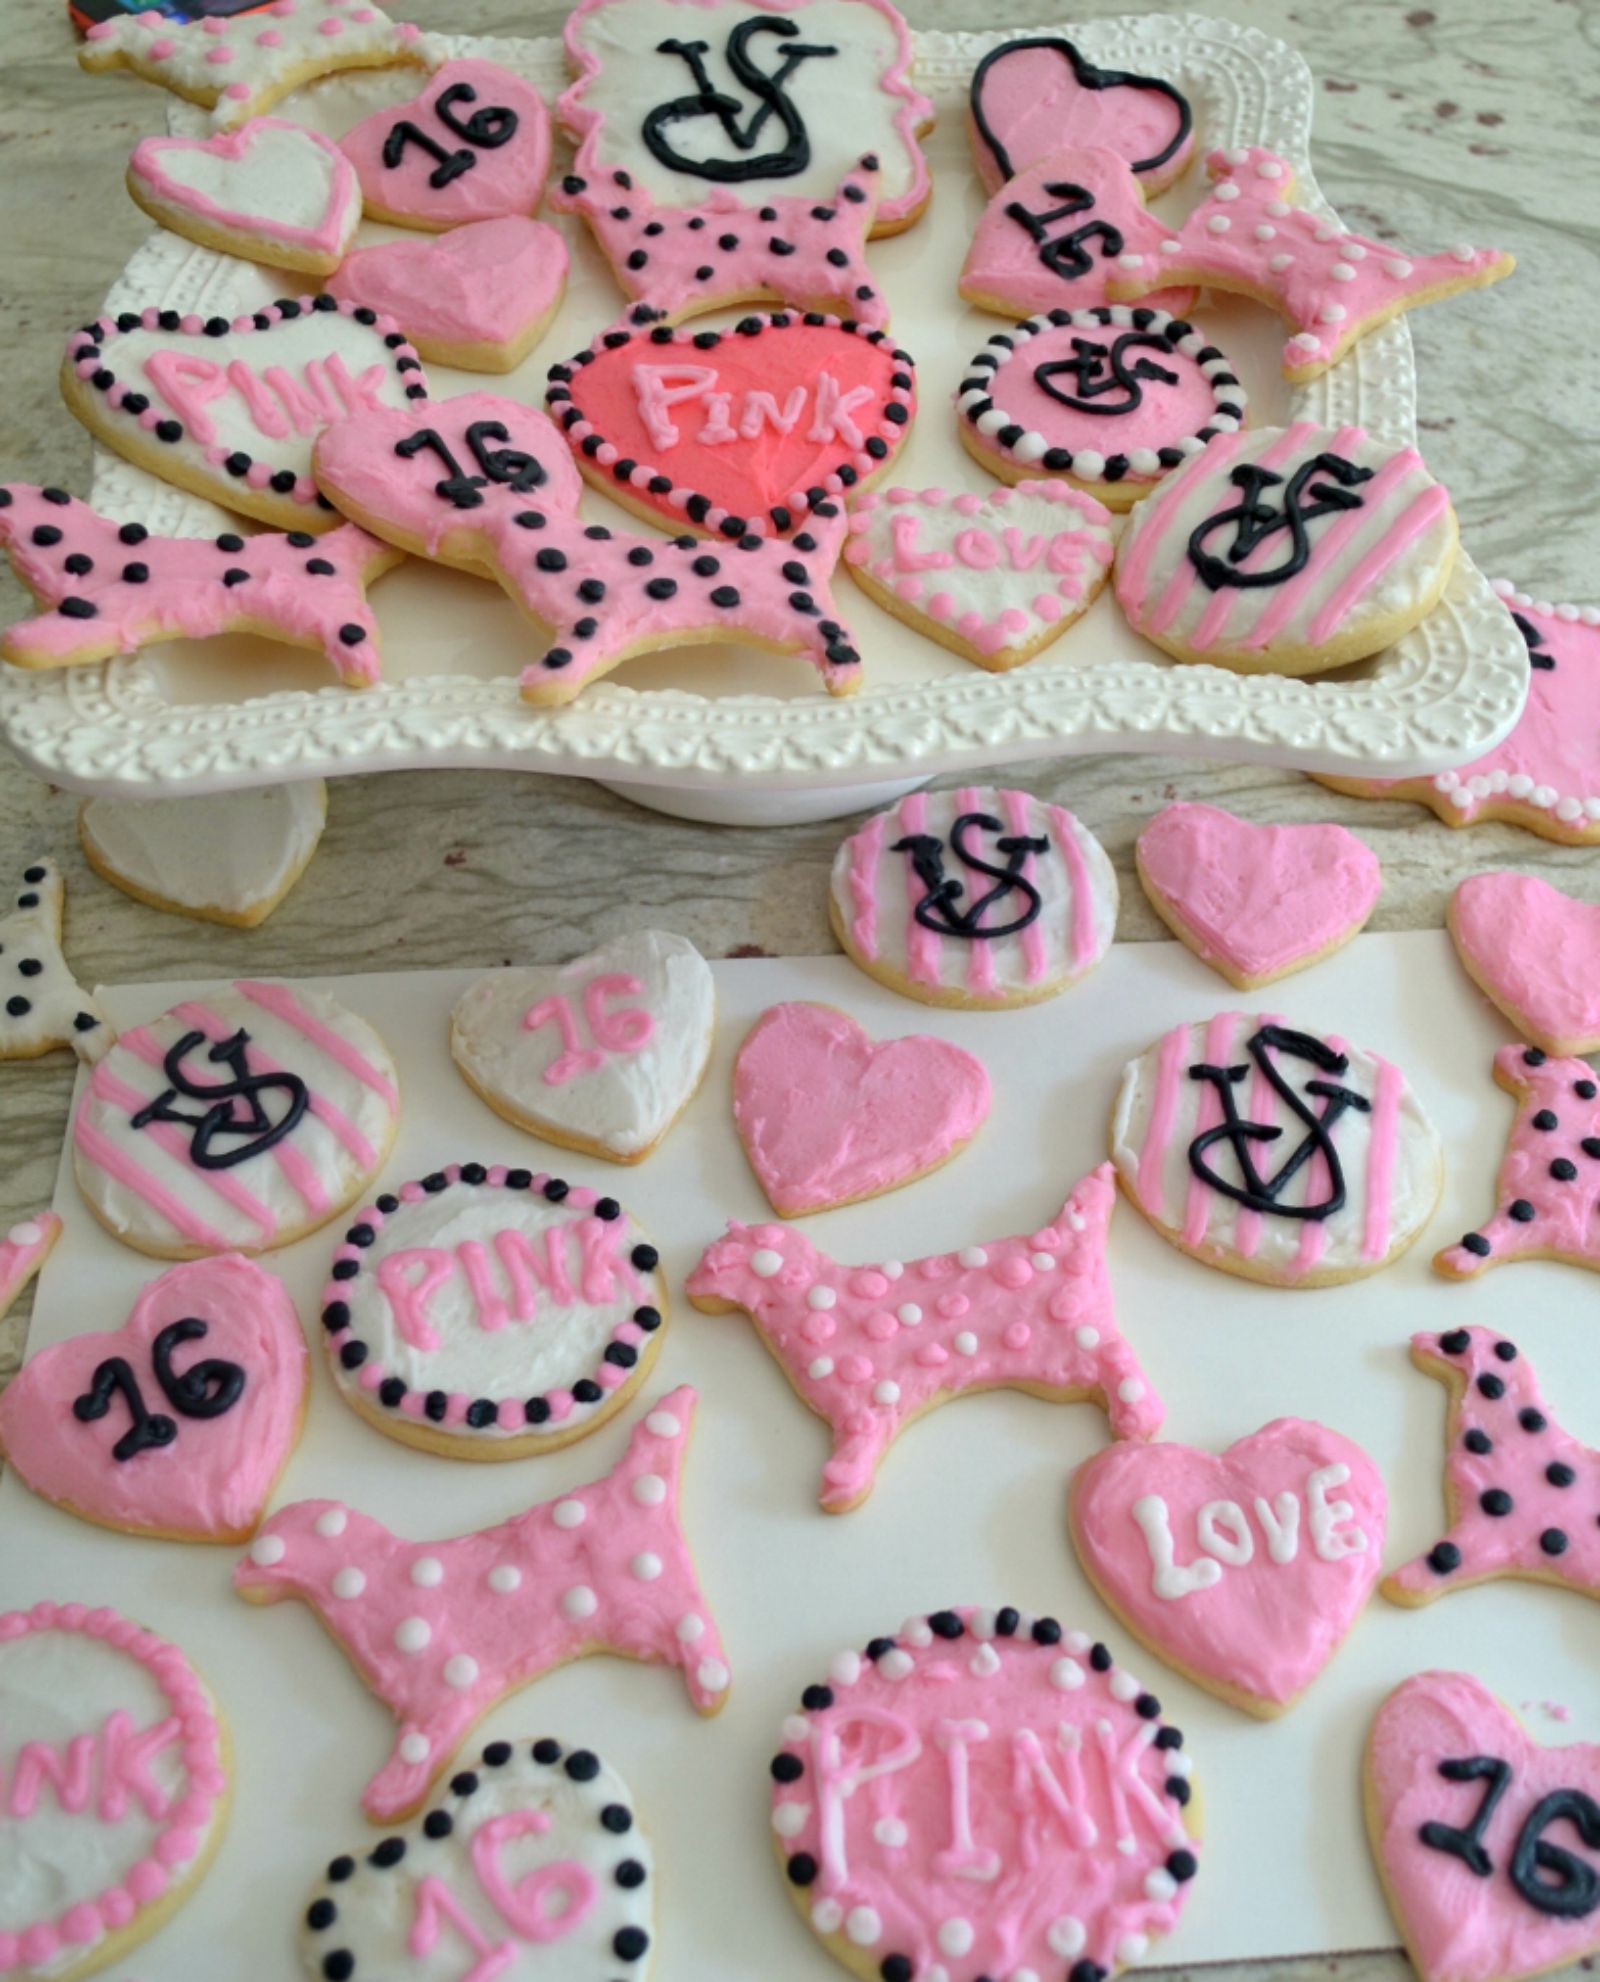 Decorated sugar cookies for a sweet 16 birthday party.